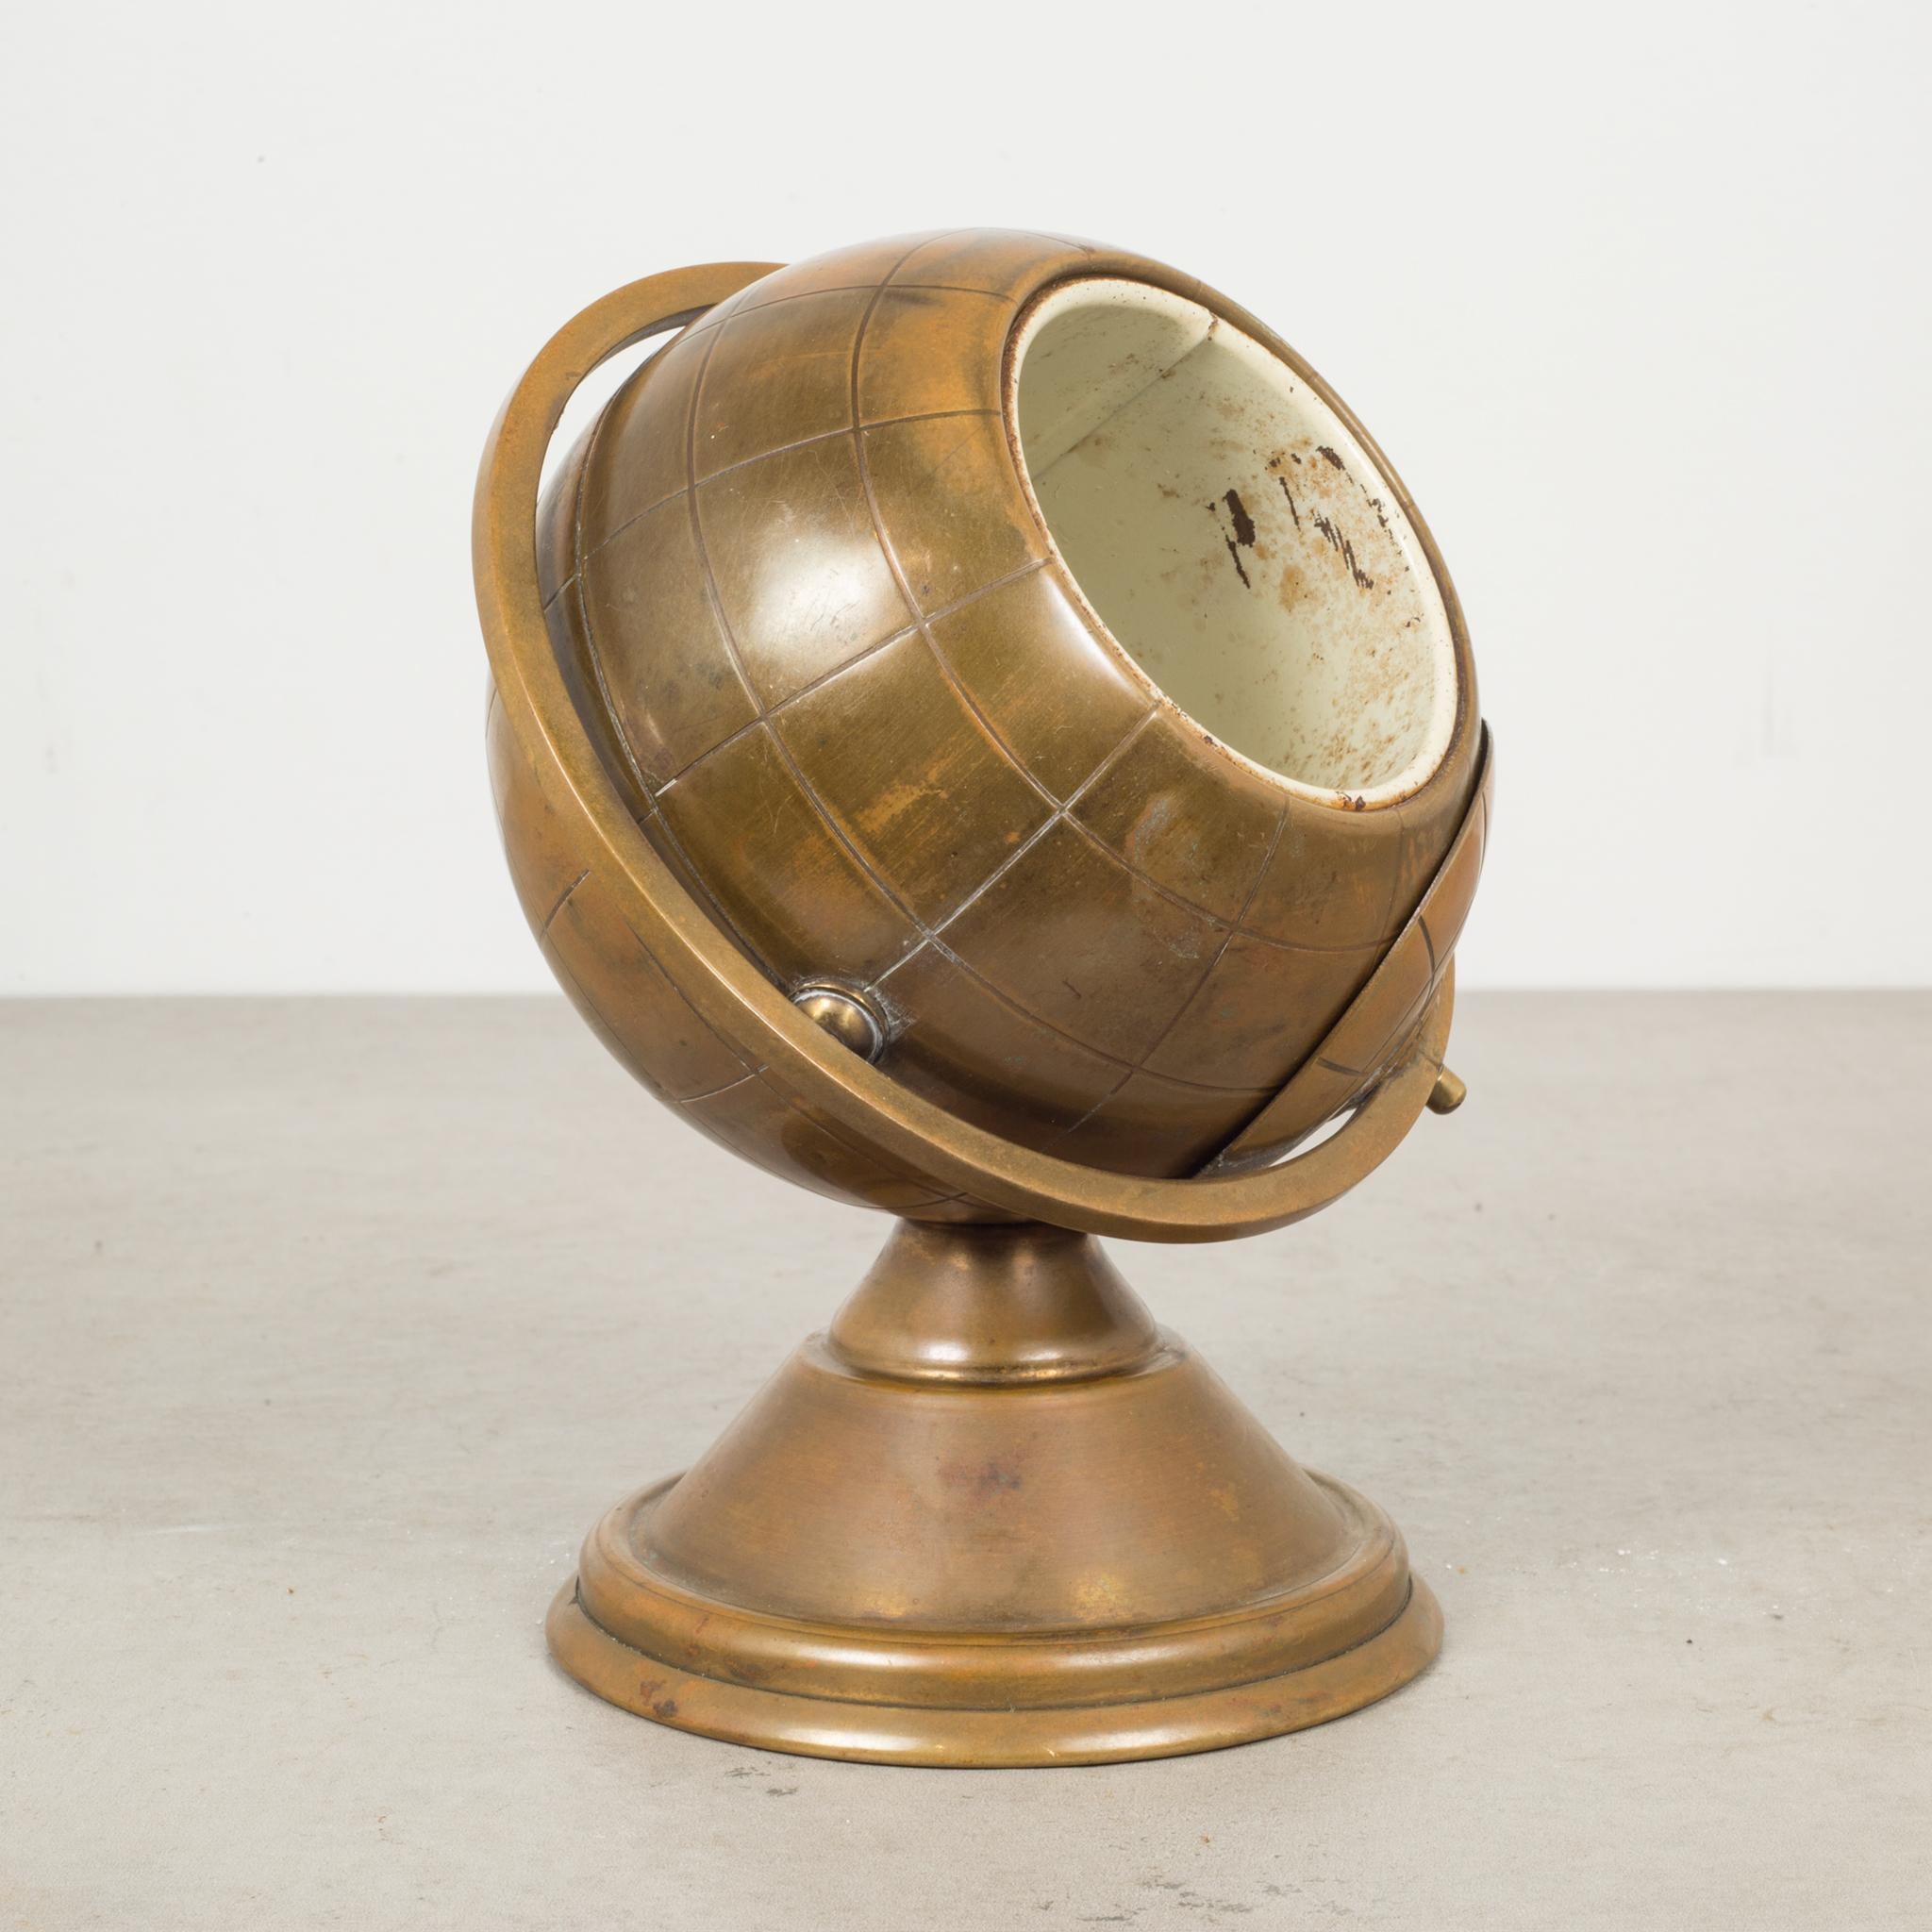 About 

This is an original midcentury brass cigarette holder. The lid slides open on the globe's axis to reveal a metal interior designed to hold cigarettes. This globe is unique because it has a leather nameplate on the bottom. This piece has